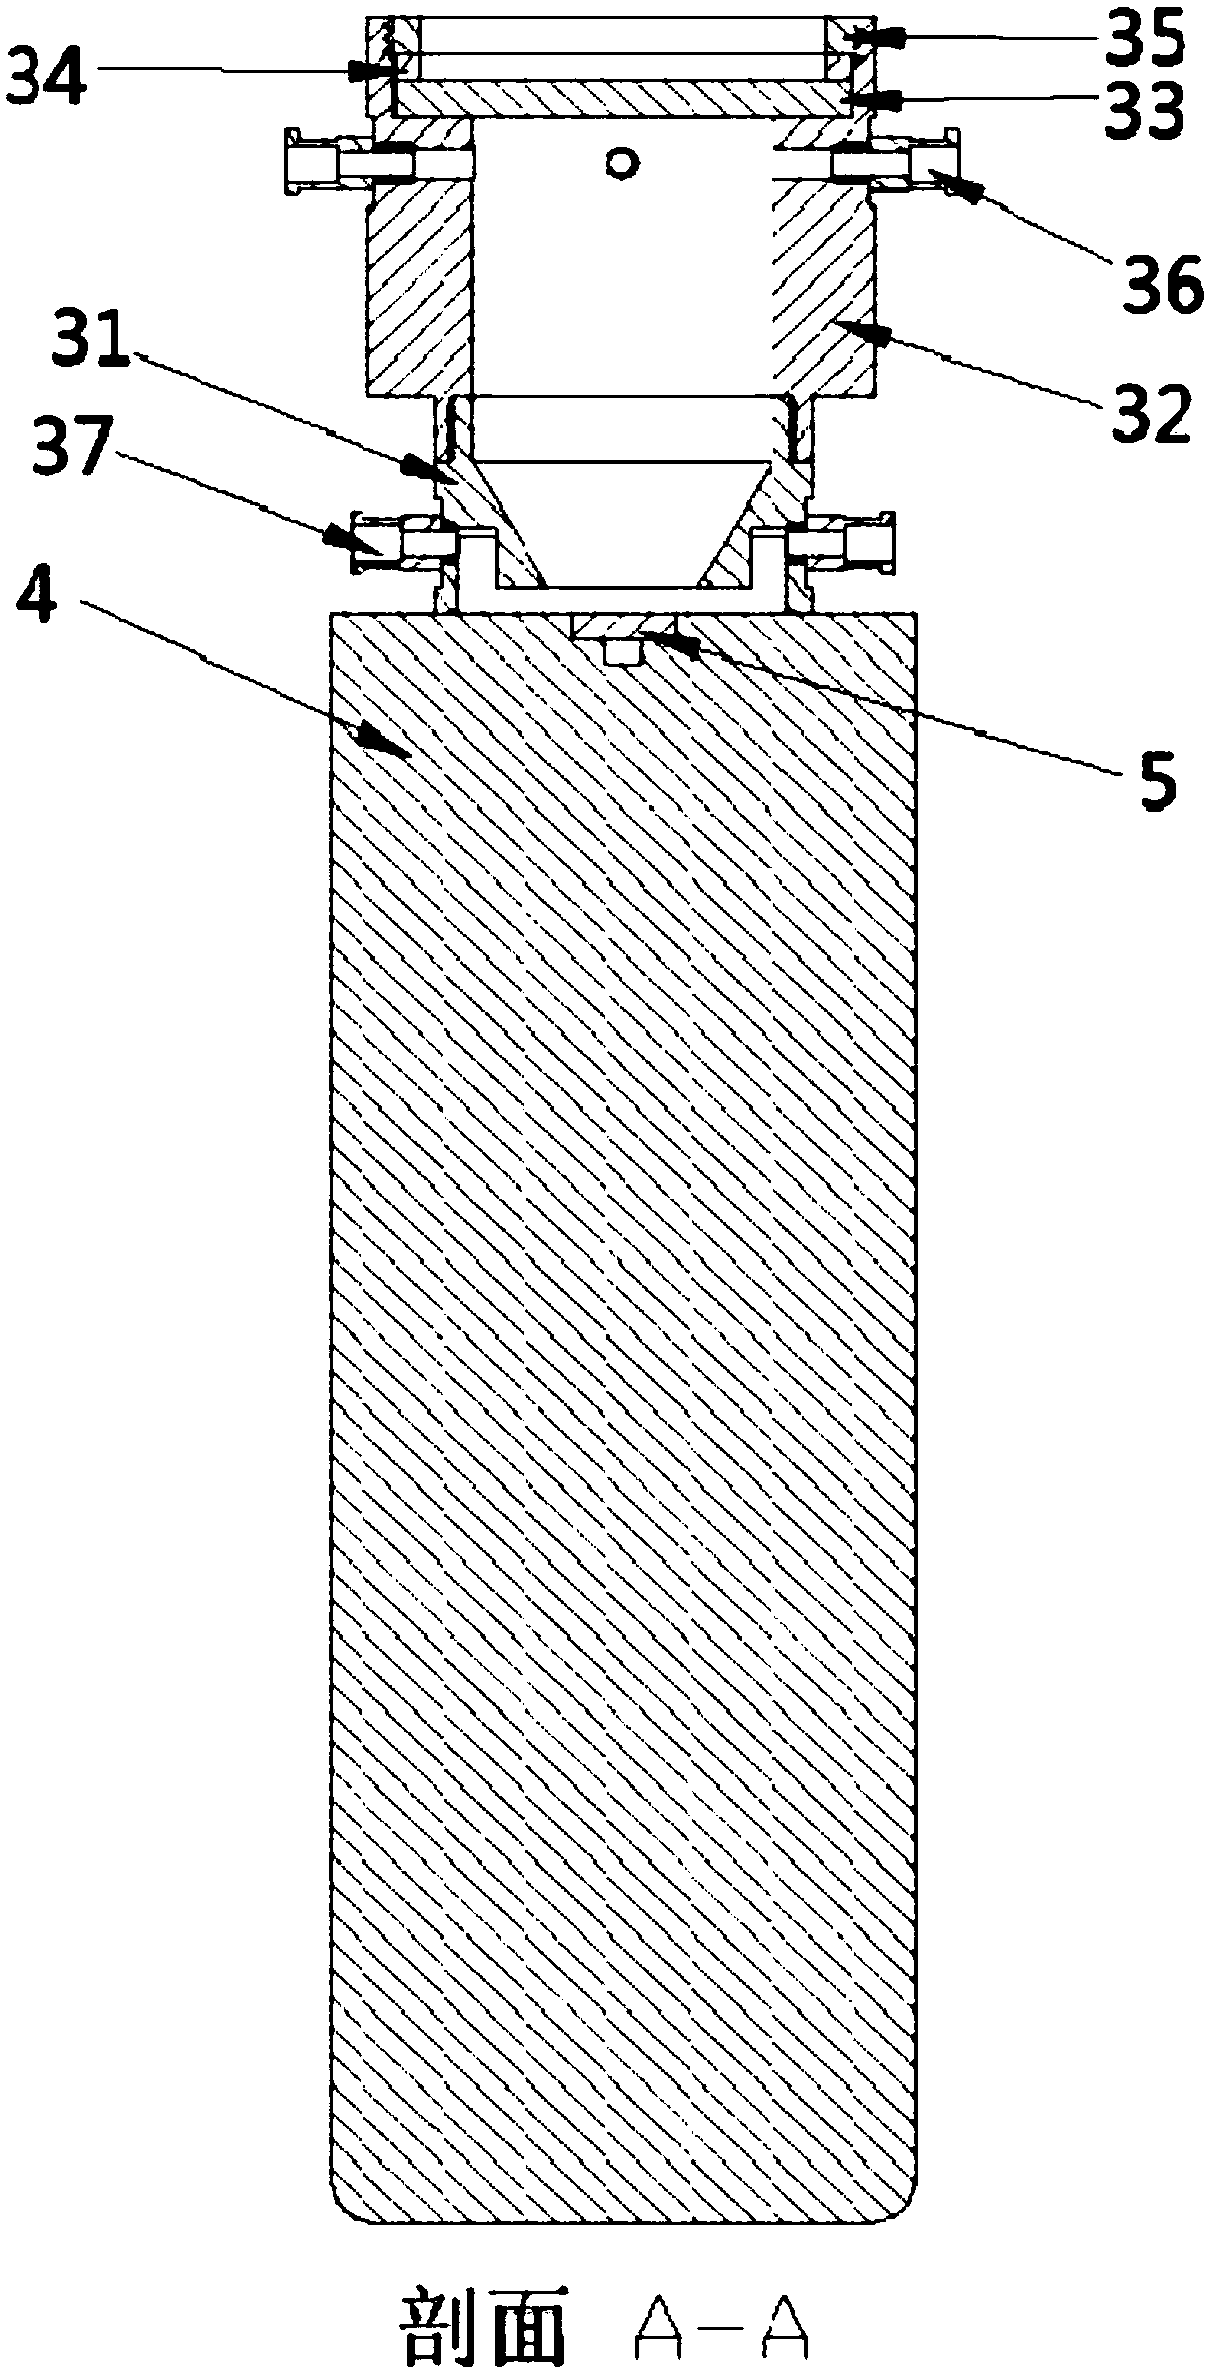 Welding system and method for battery sealing nails